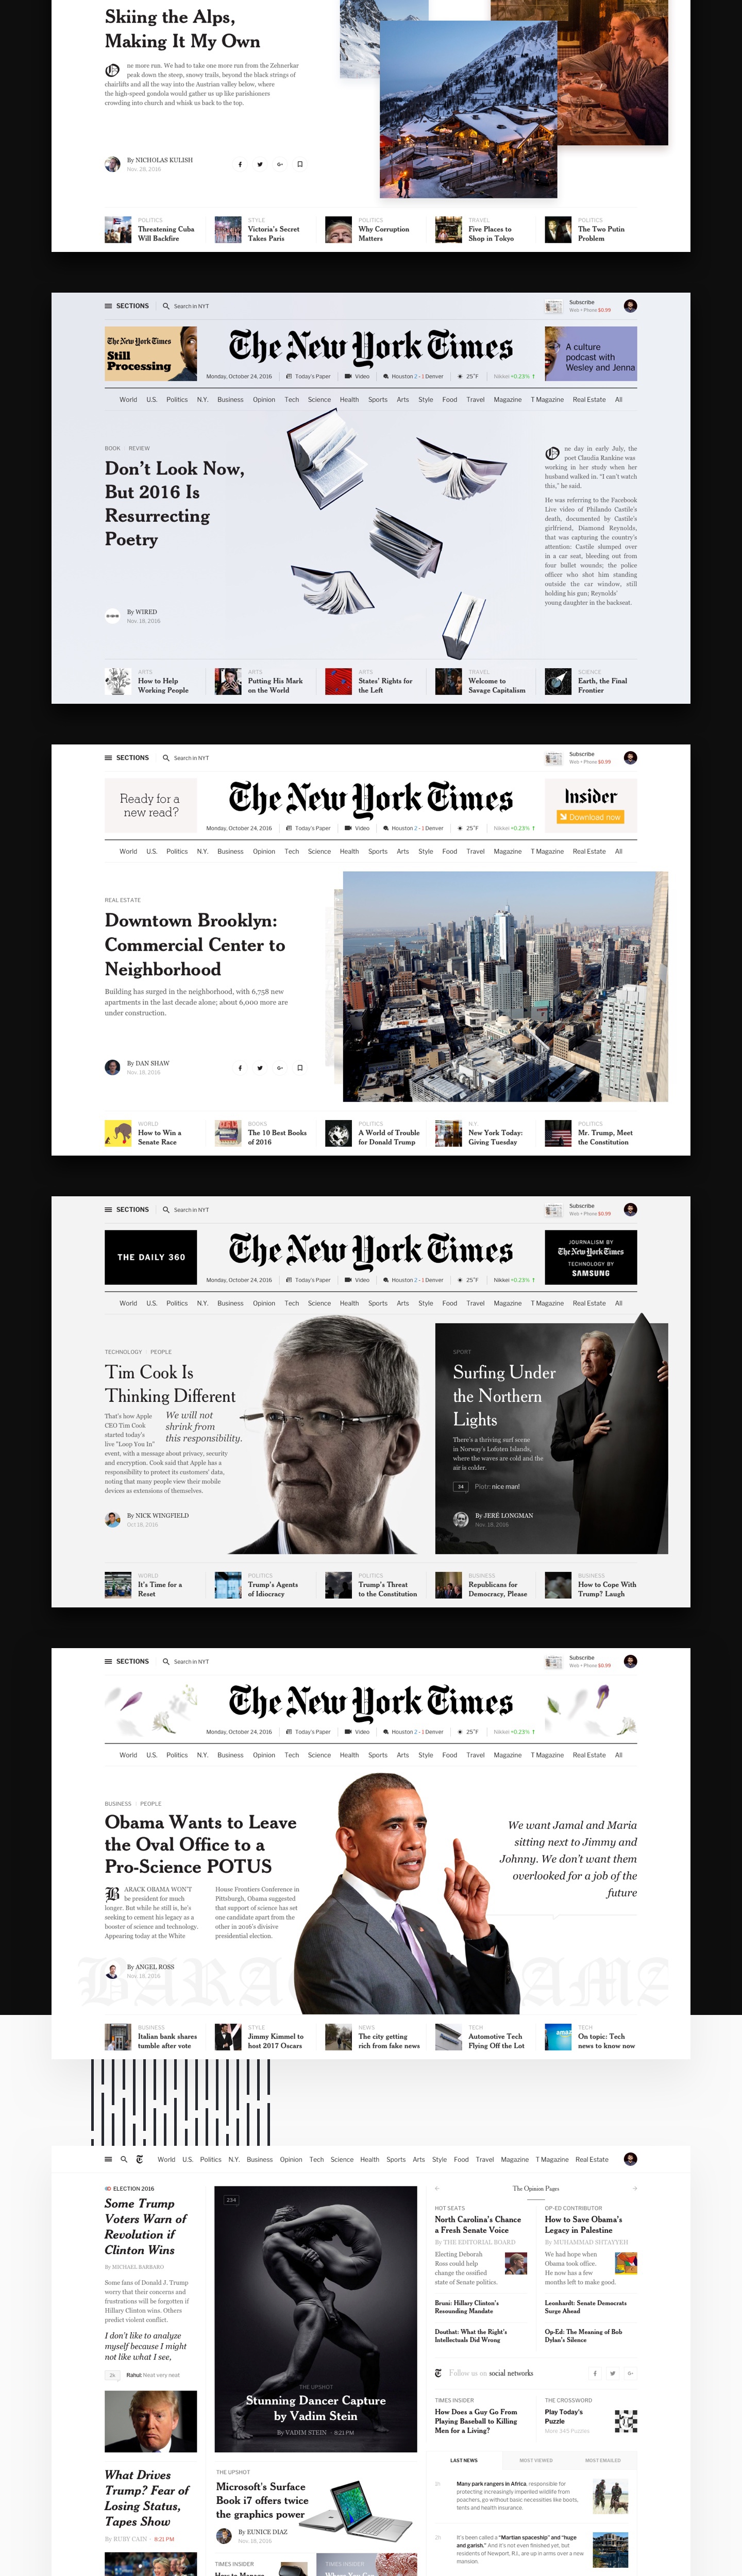 Editorial Design: The New York Times Redesign Concept